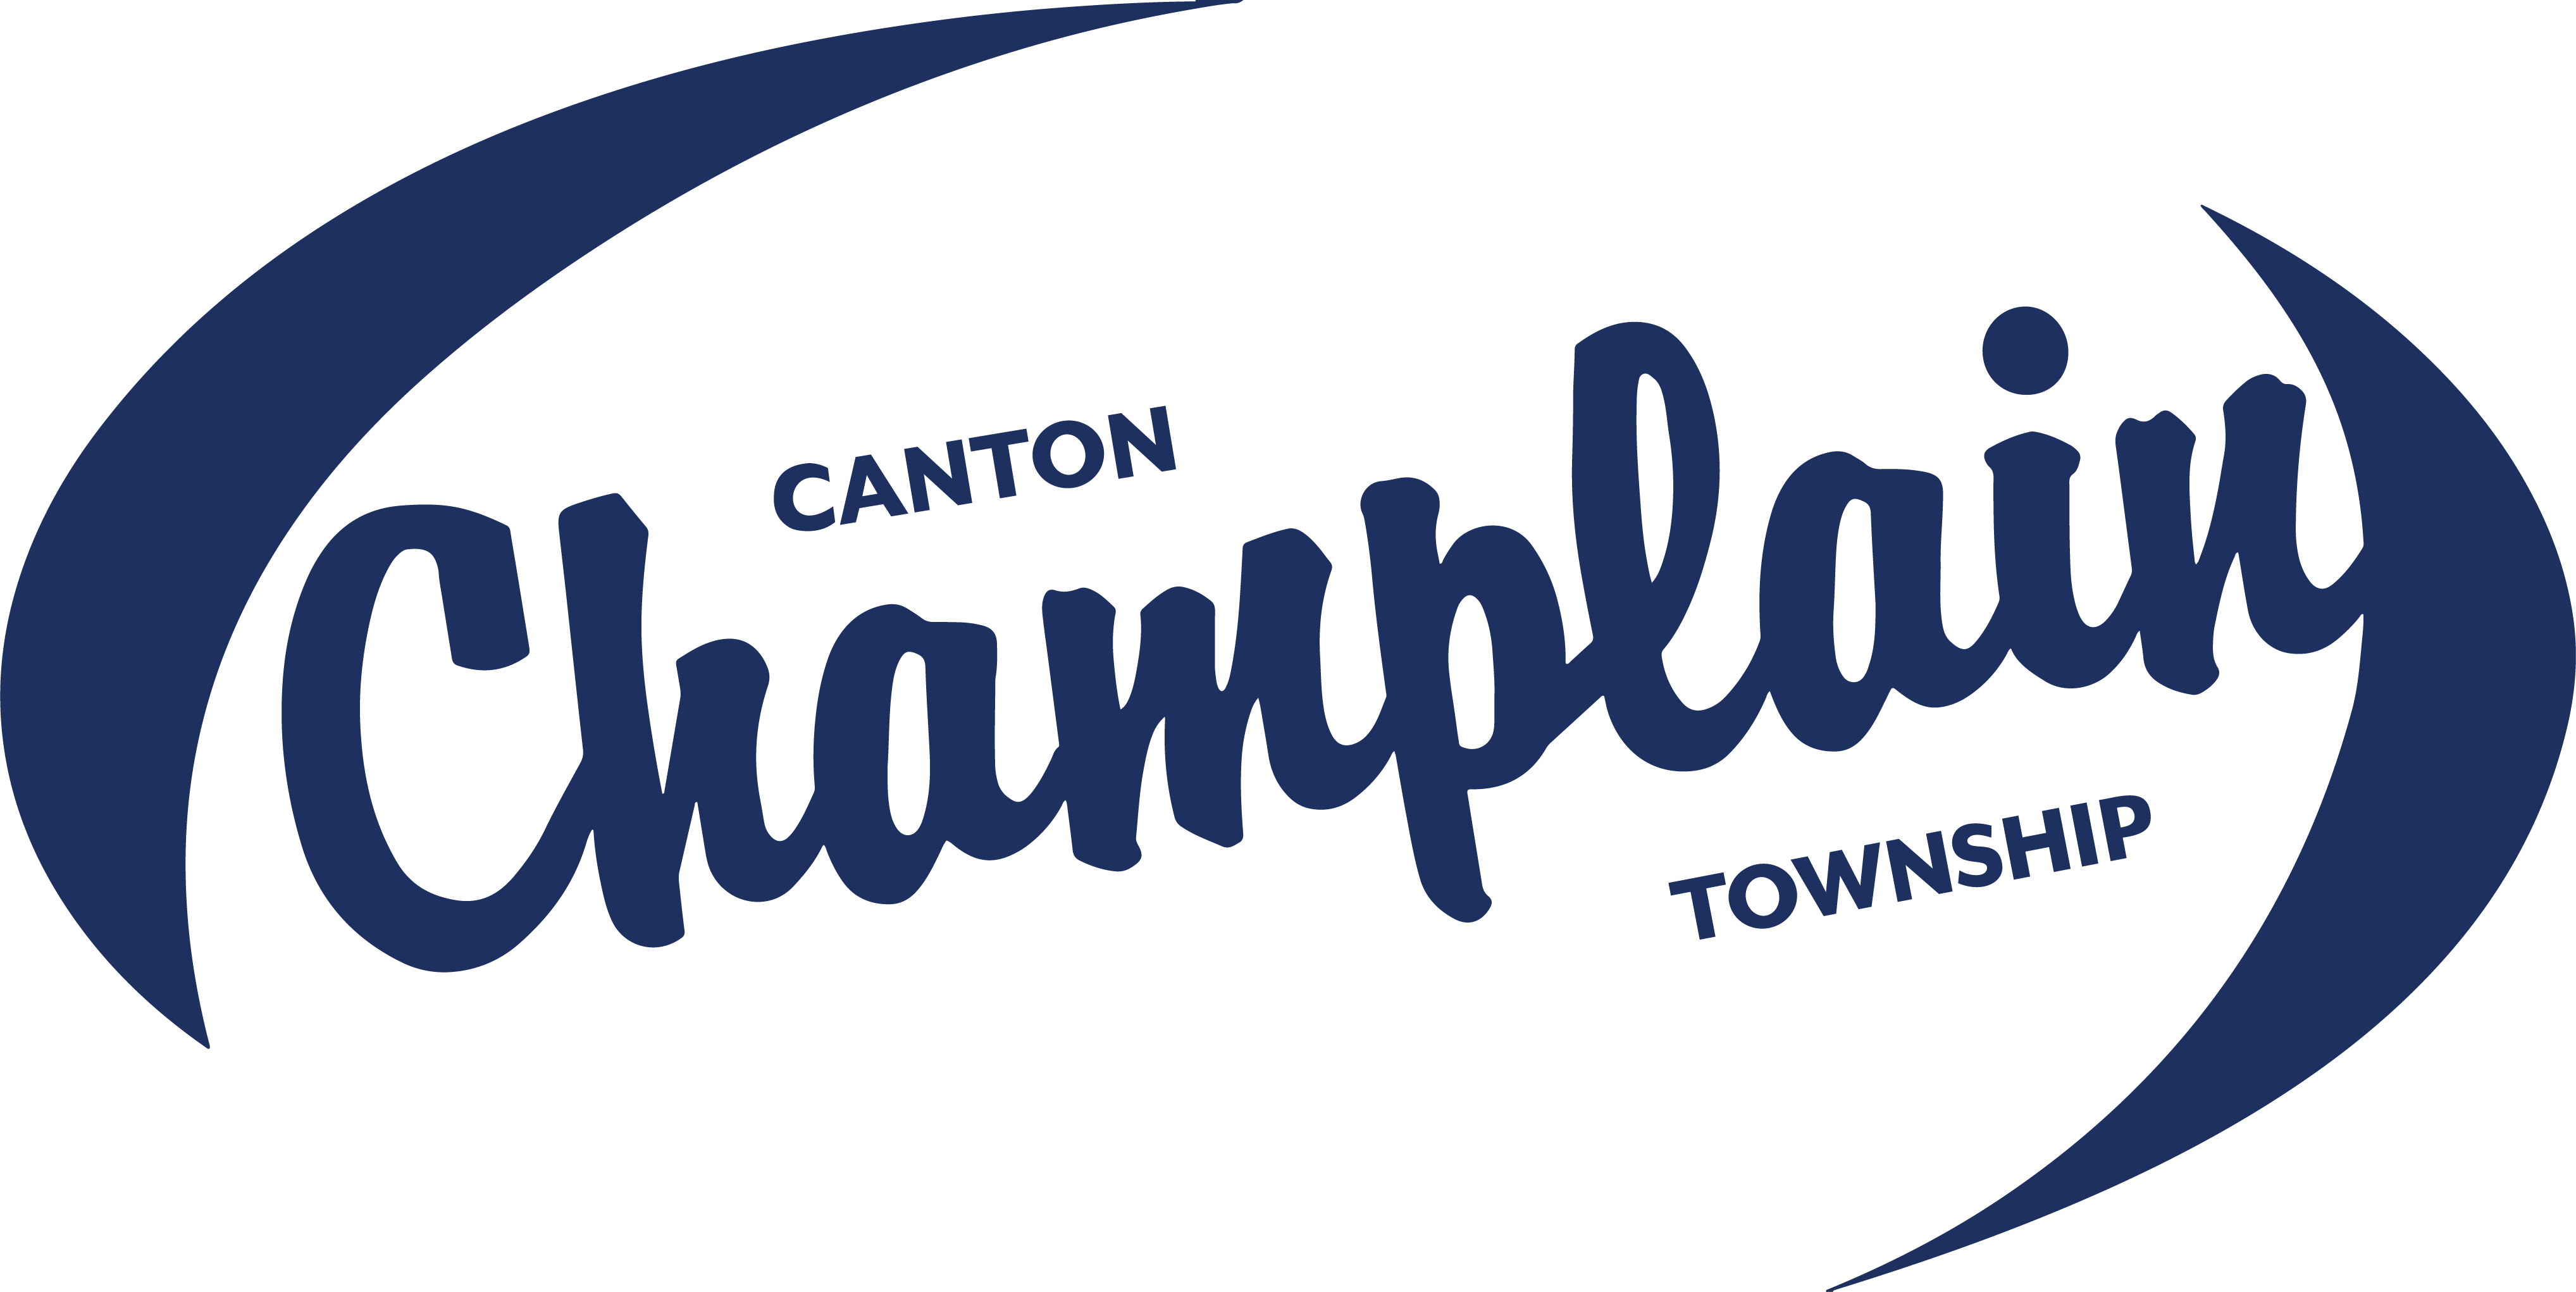 Organization logo of Corporation of the Township of Champlain